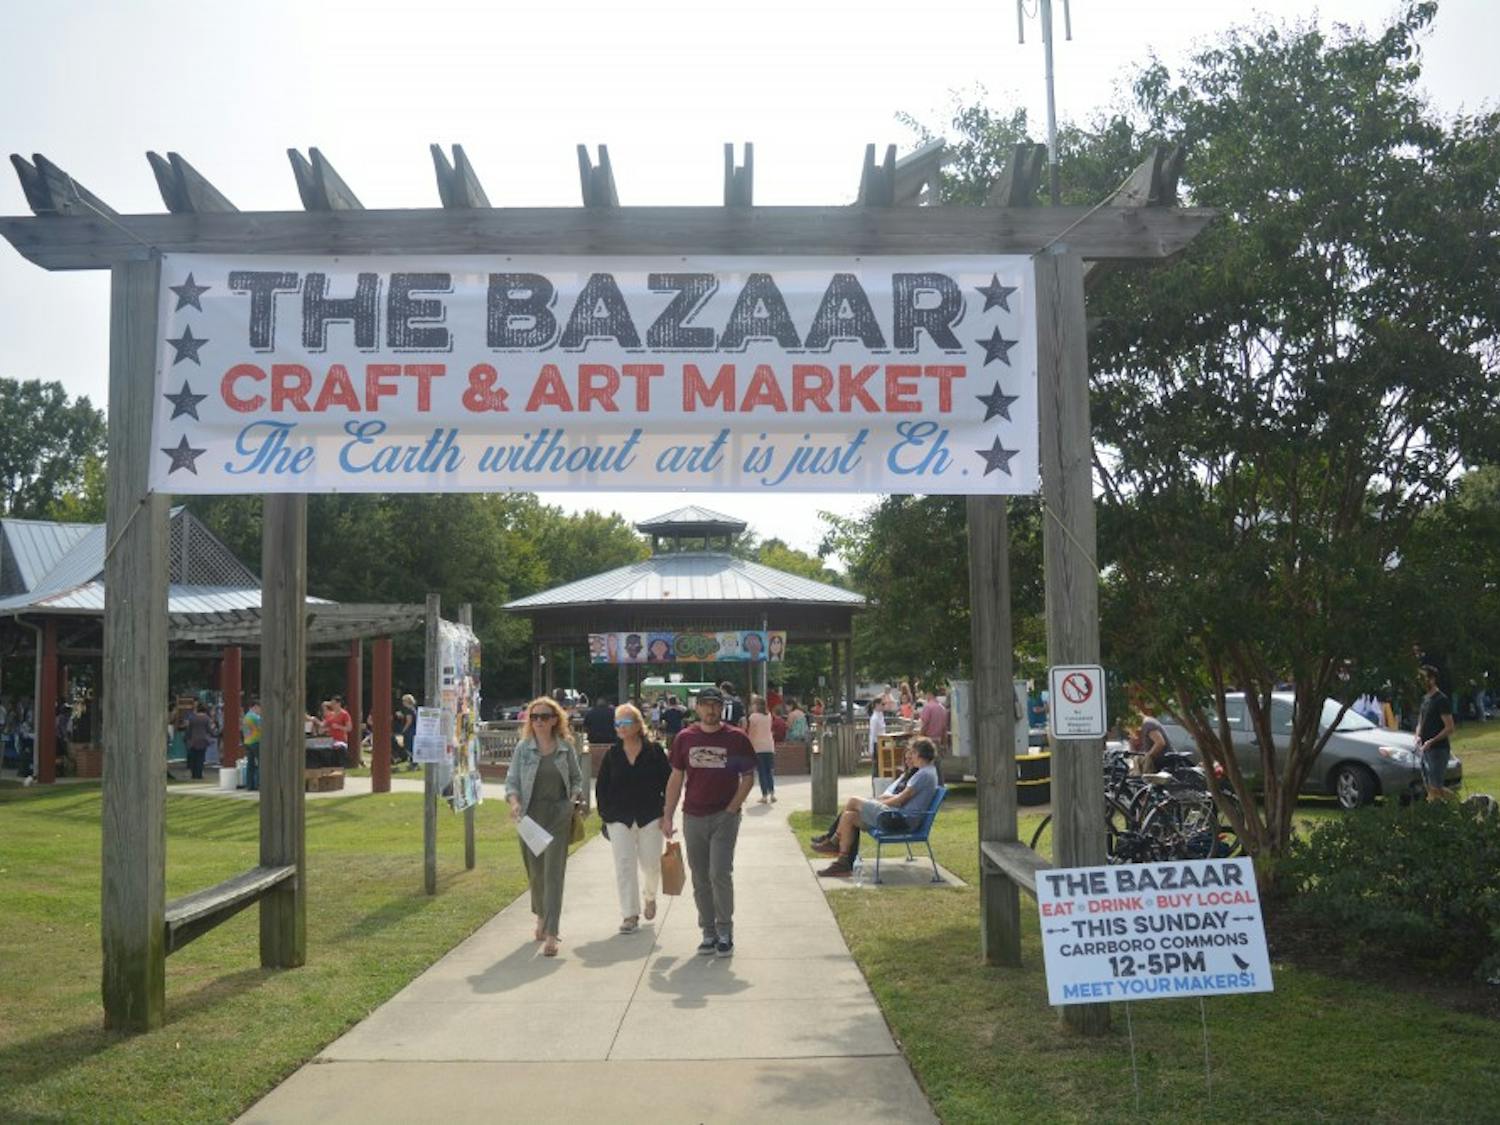 The Carrboro Bazaar Arts and Craft Market was held on Sunday afternoon where people from the community bought and sold art.